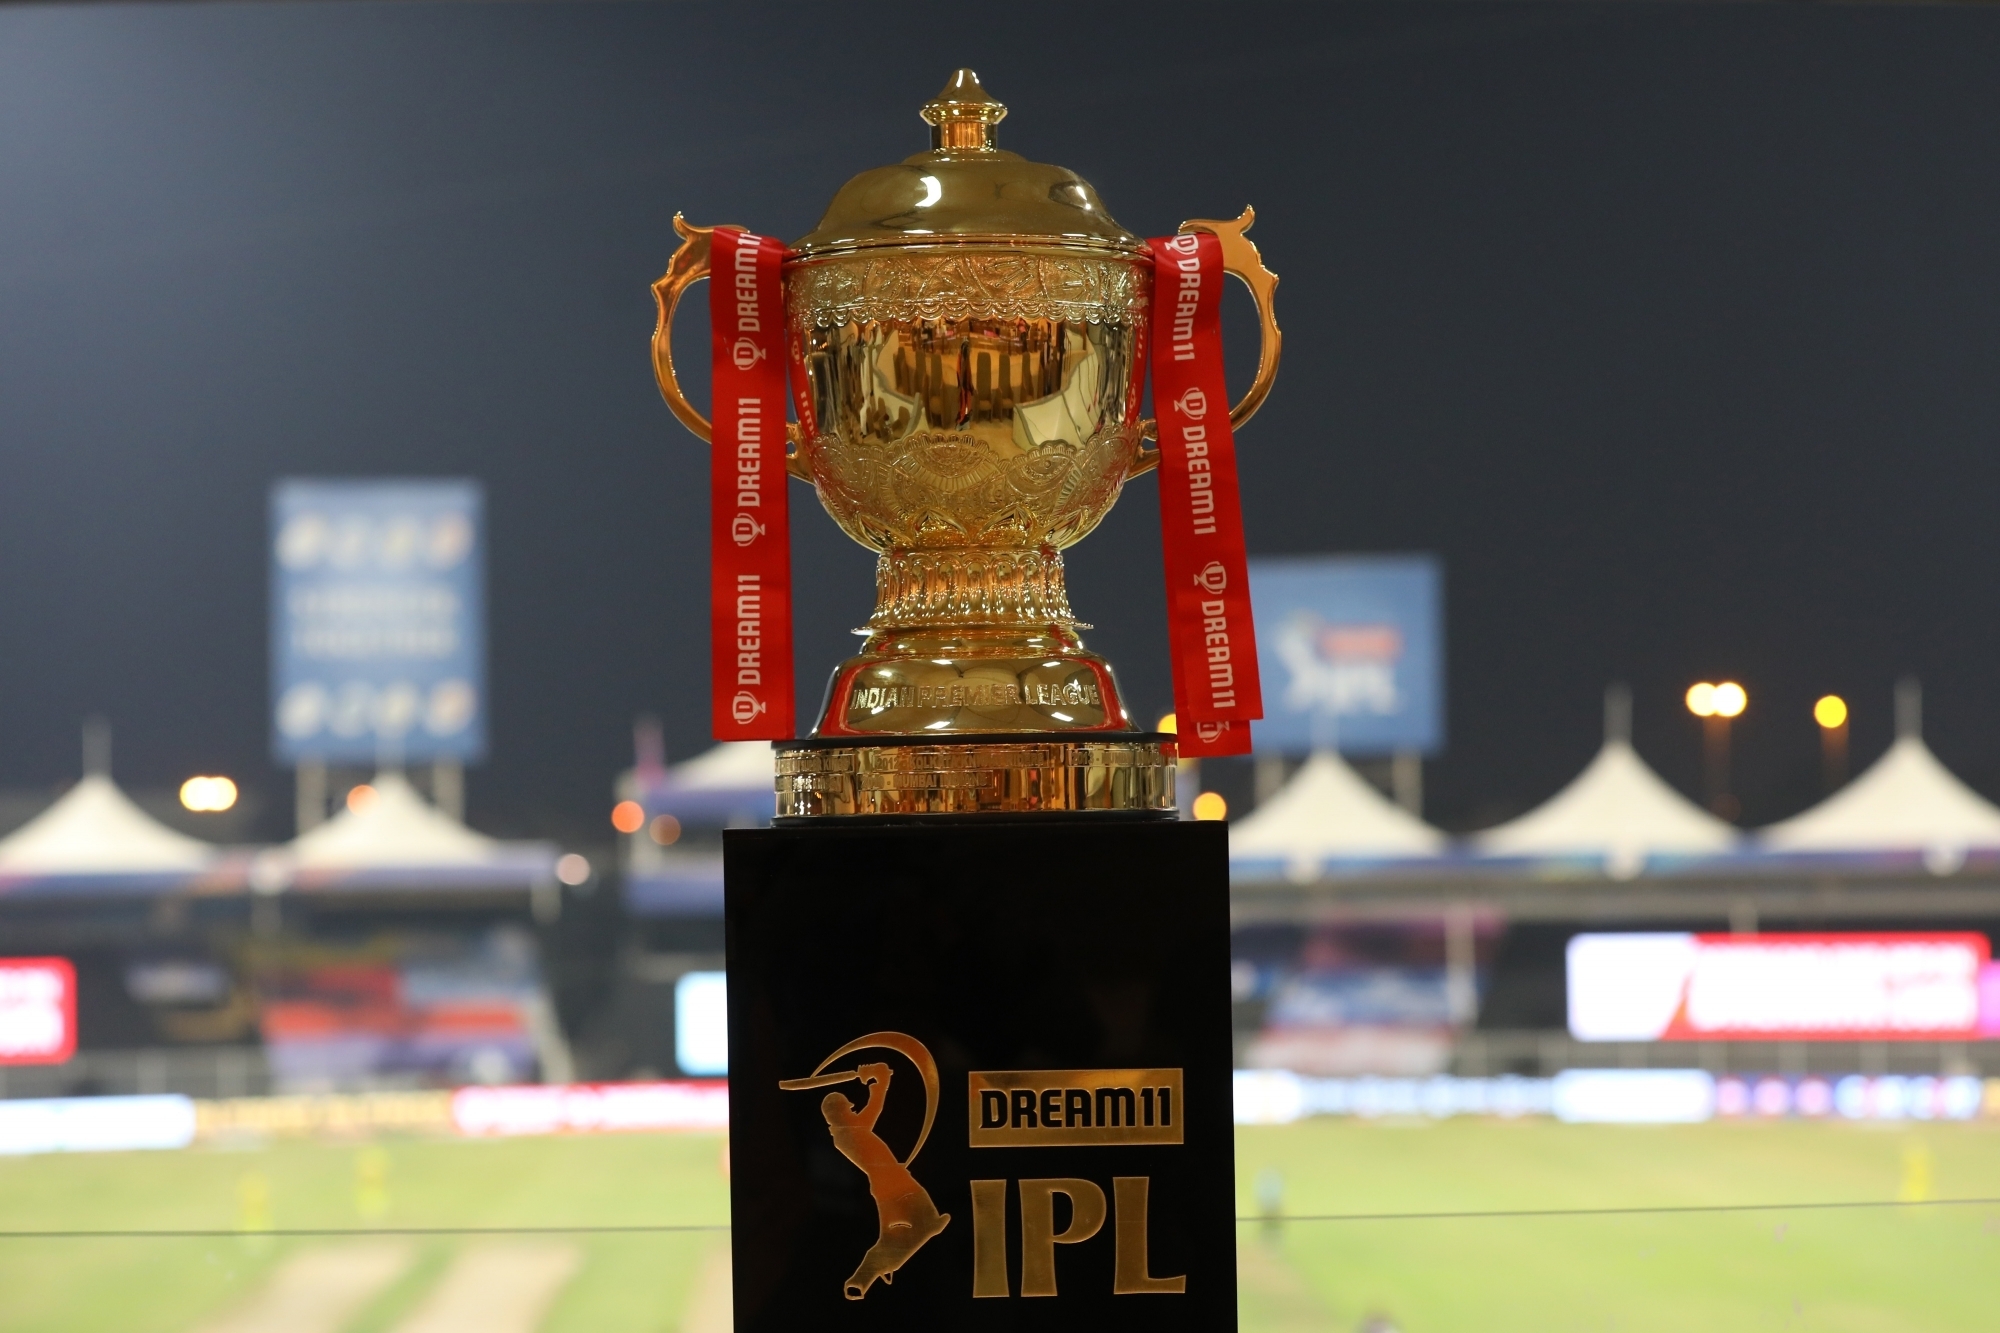 The IPL 2020 was filled with amazing performances from overseas players as well | BCCI/IPL